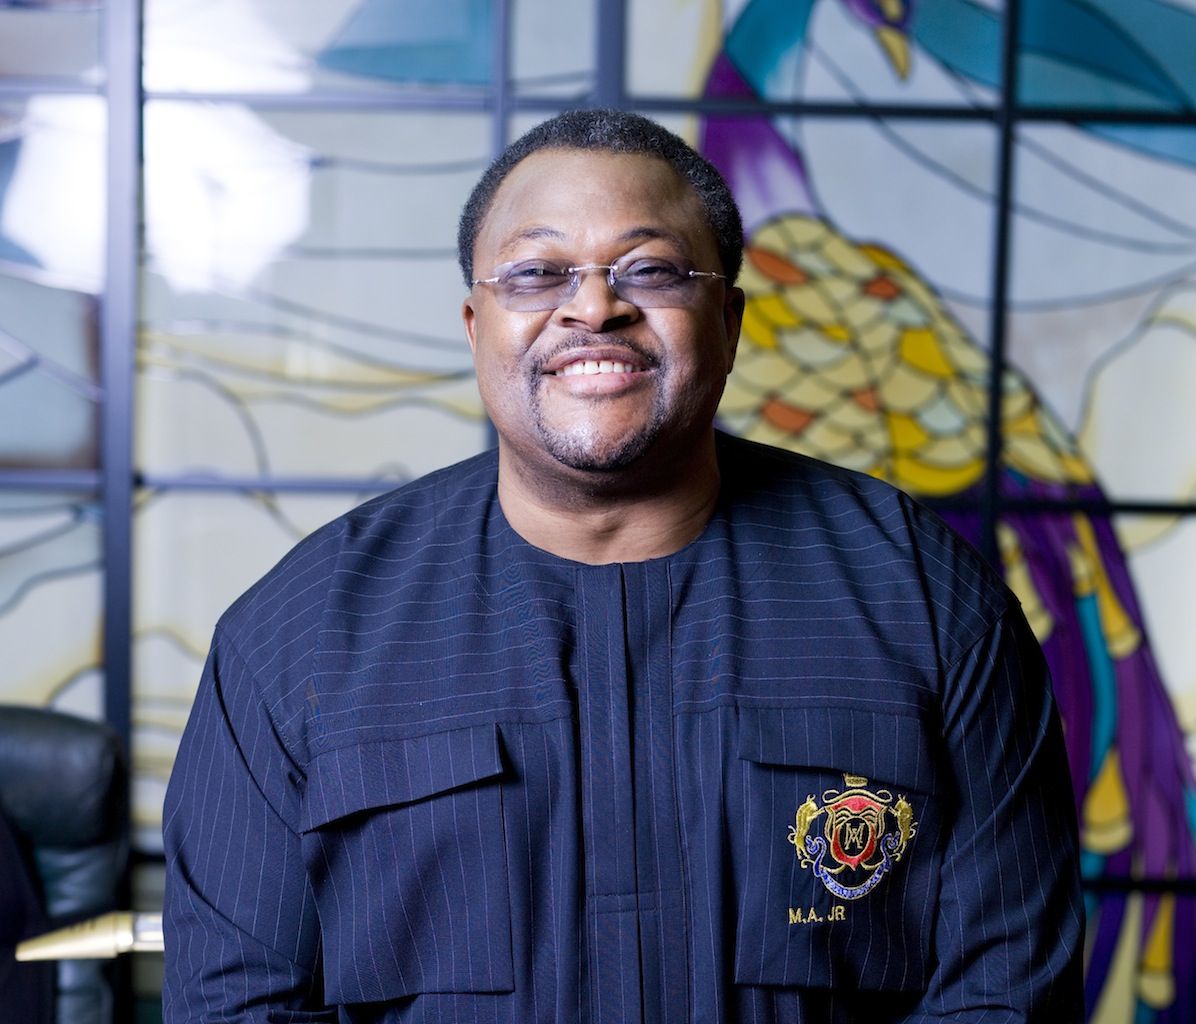 Dr Mike Adenuga, Chairman, Globacom Limited, owners of Glo Mobile Benin